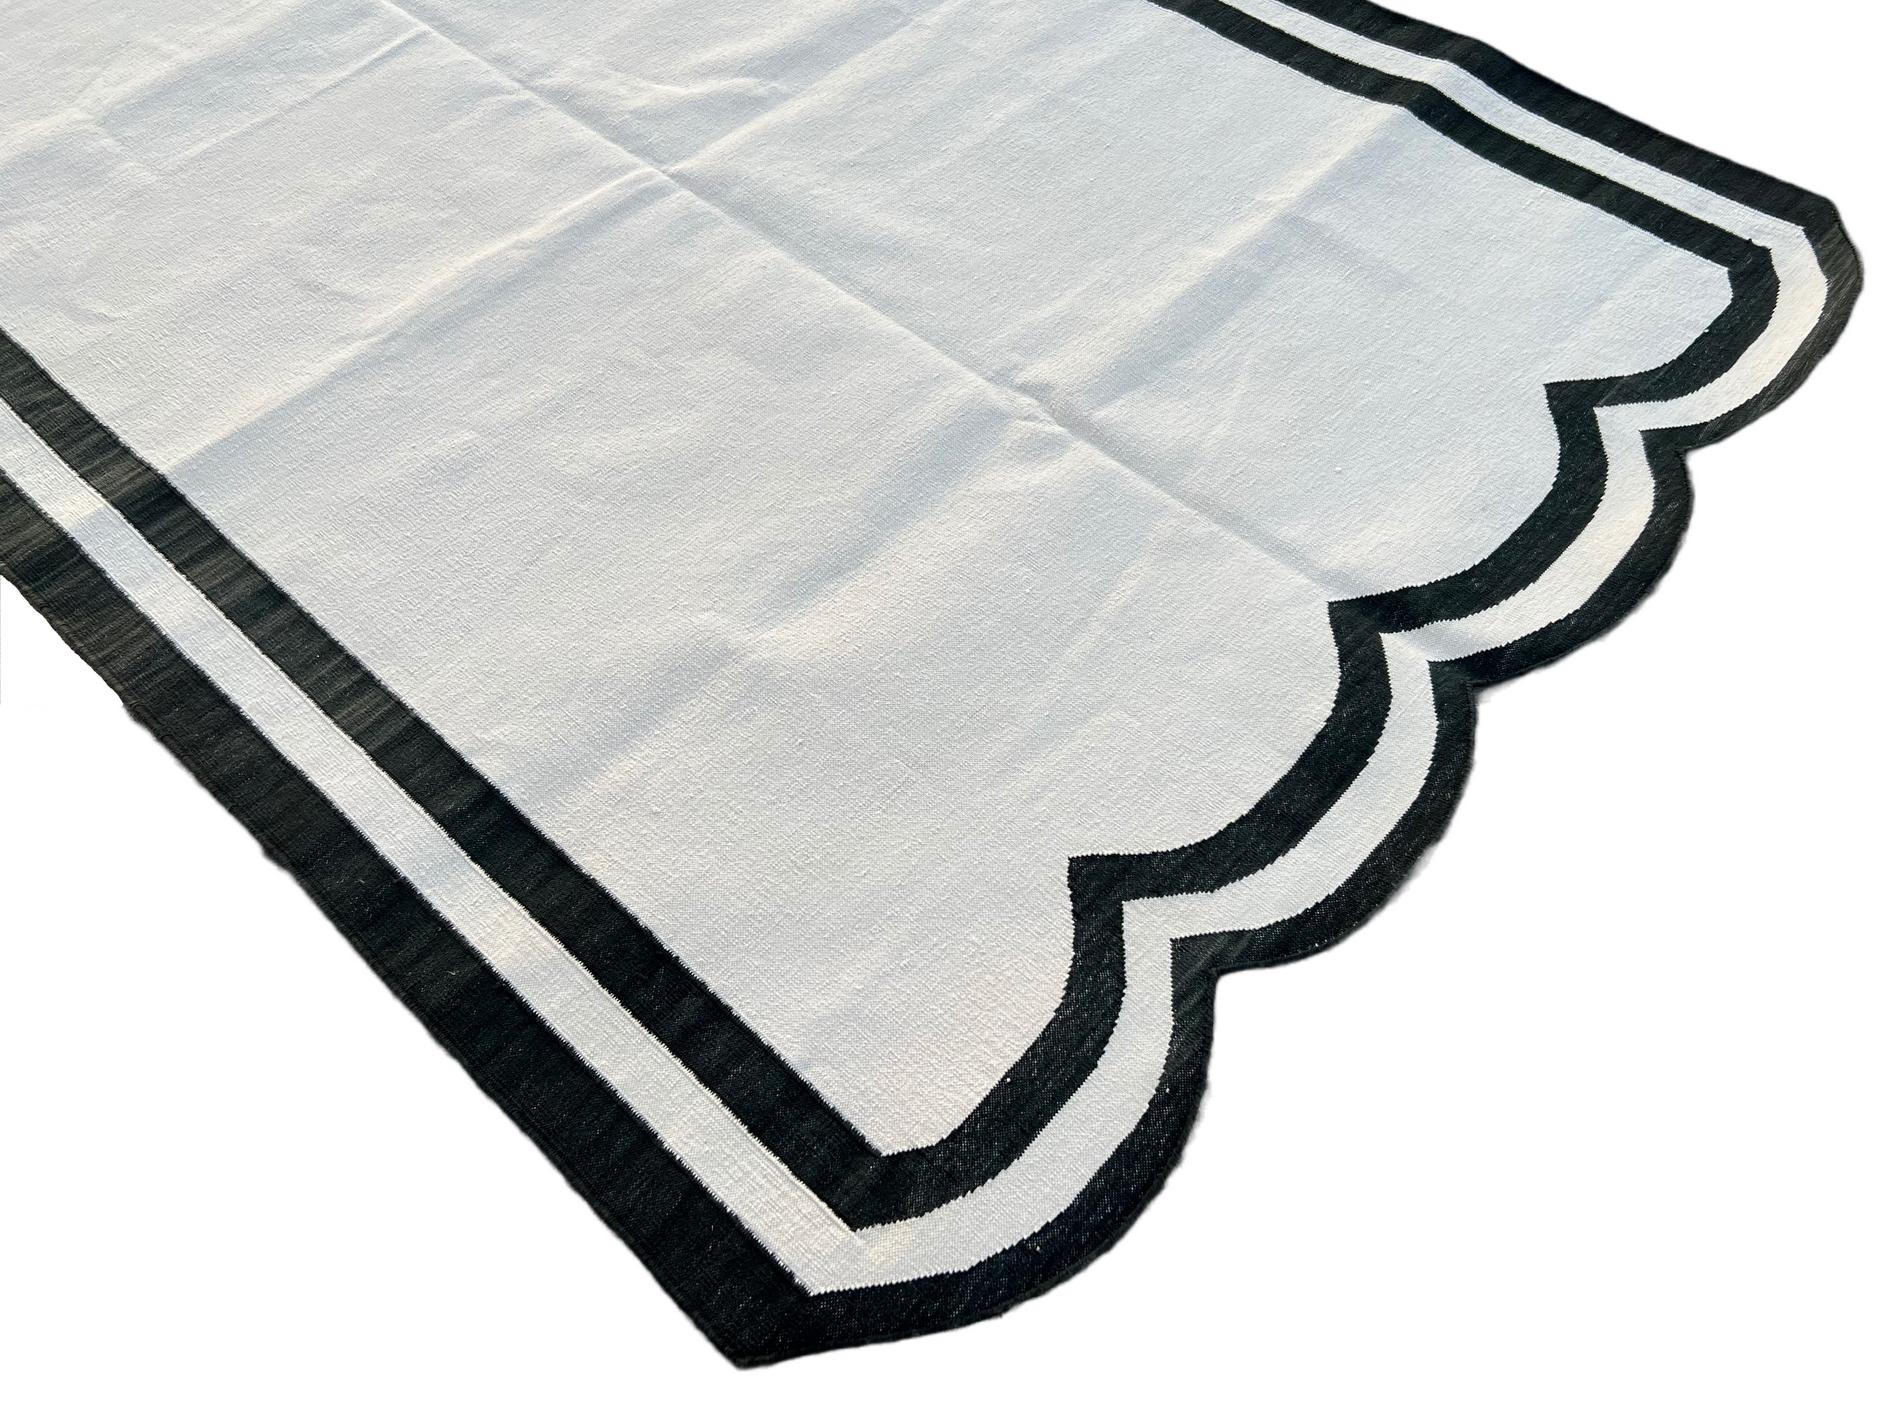 Cotton Vegetable Dyed Black and White Scalloped Striped Indian Dhurrie Rug-4'x6' 

These special flat-weave dhurries are hand-woven with 15 ply 100% cotton yarn. Due to the special manufacturing techniques used to create our rugs, the size and color